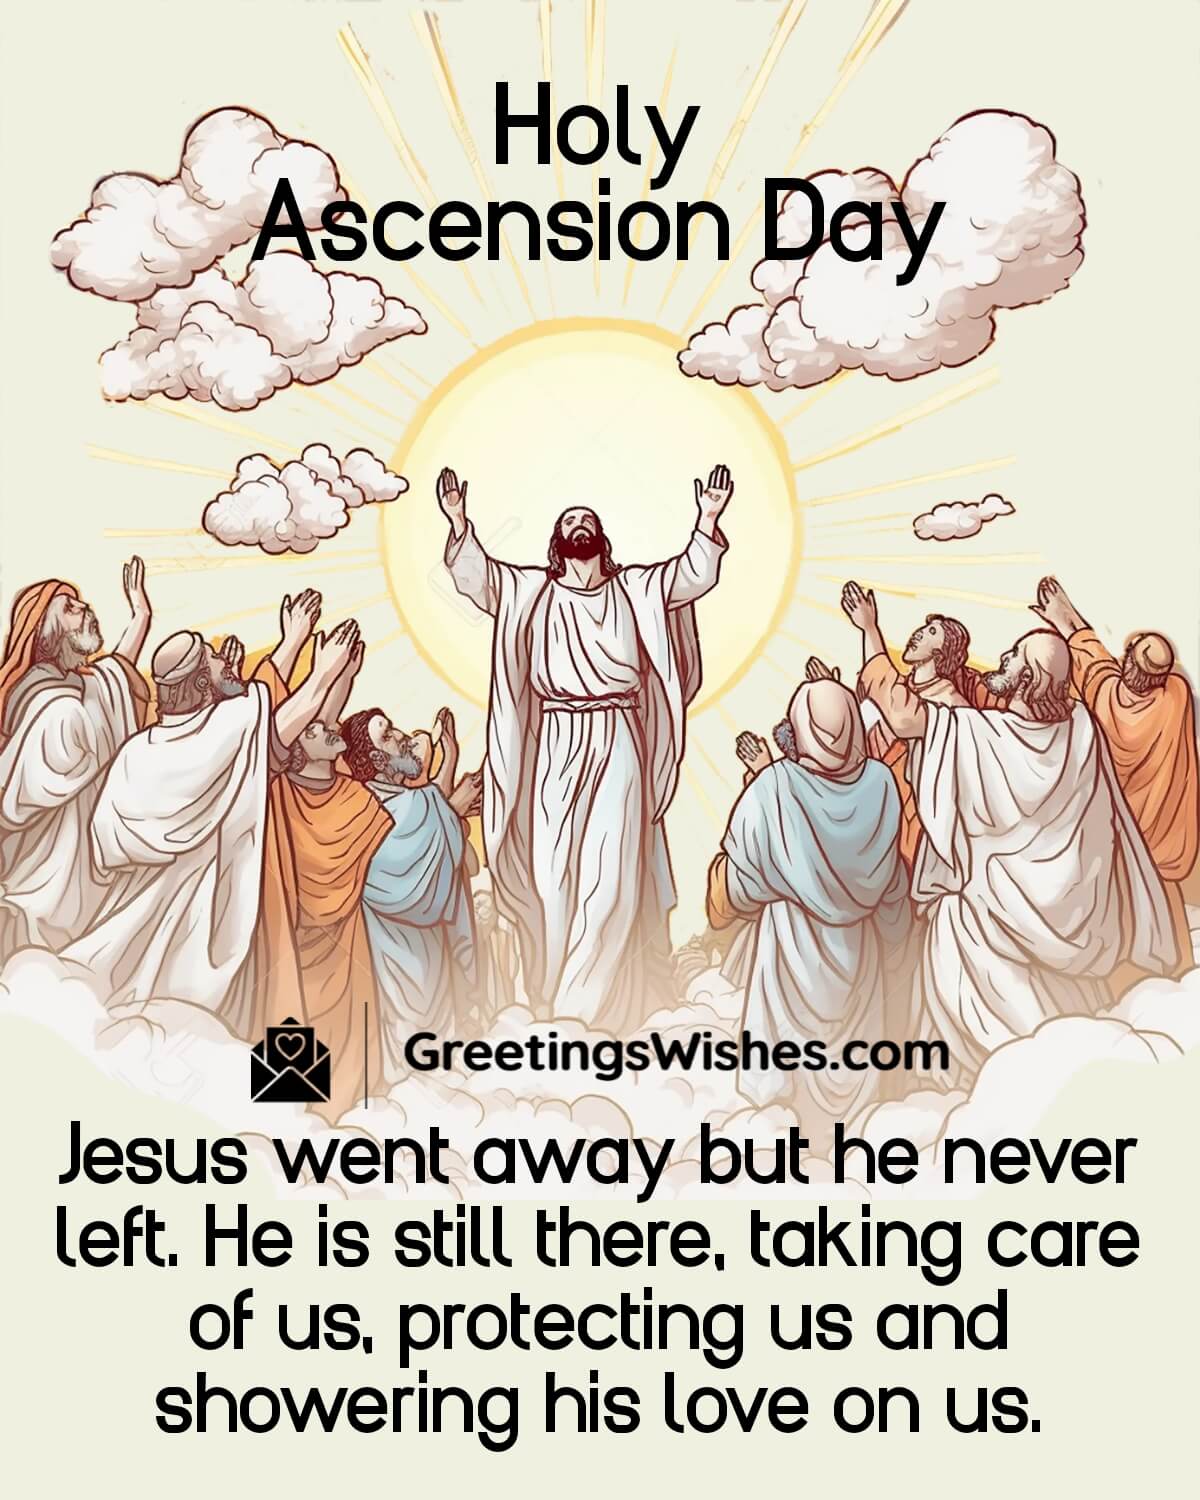 Holy Ascension Day Message